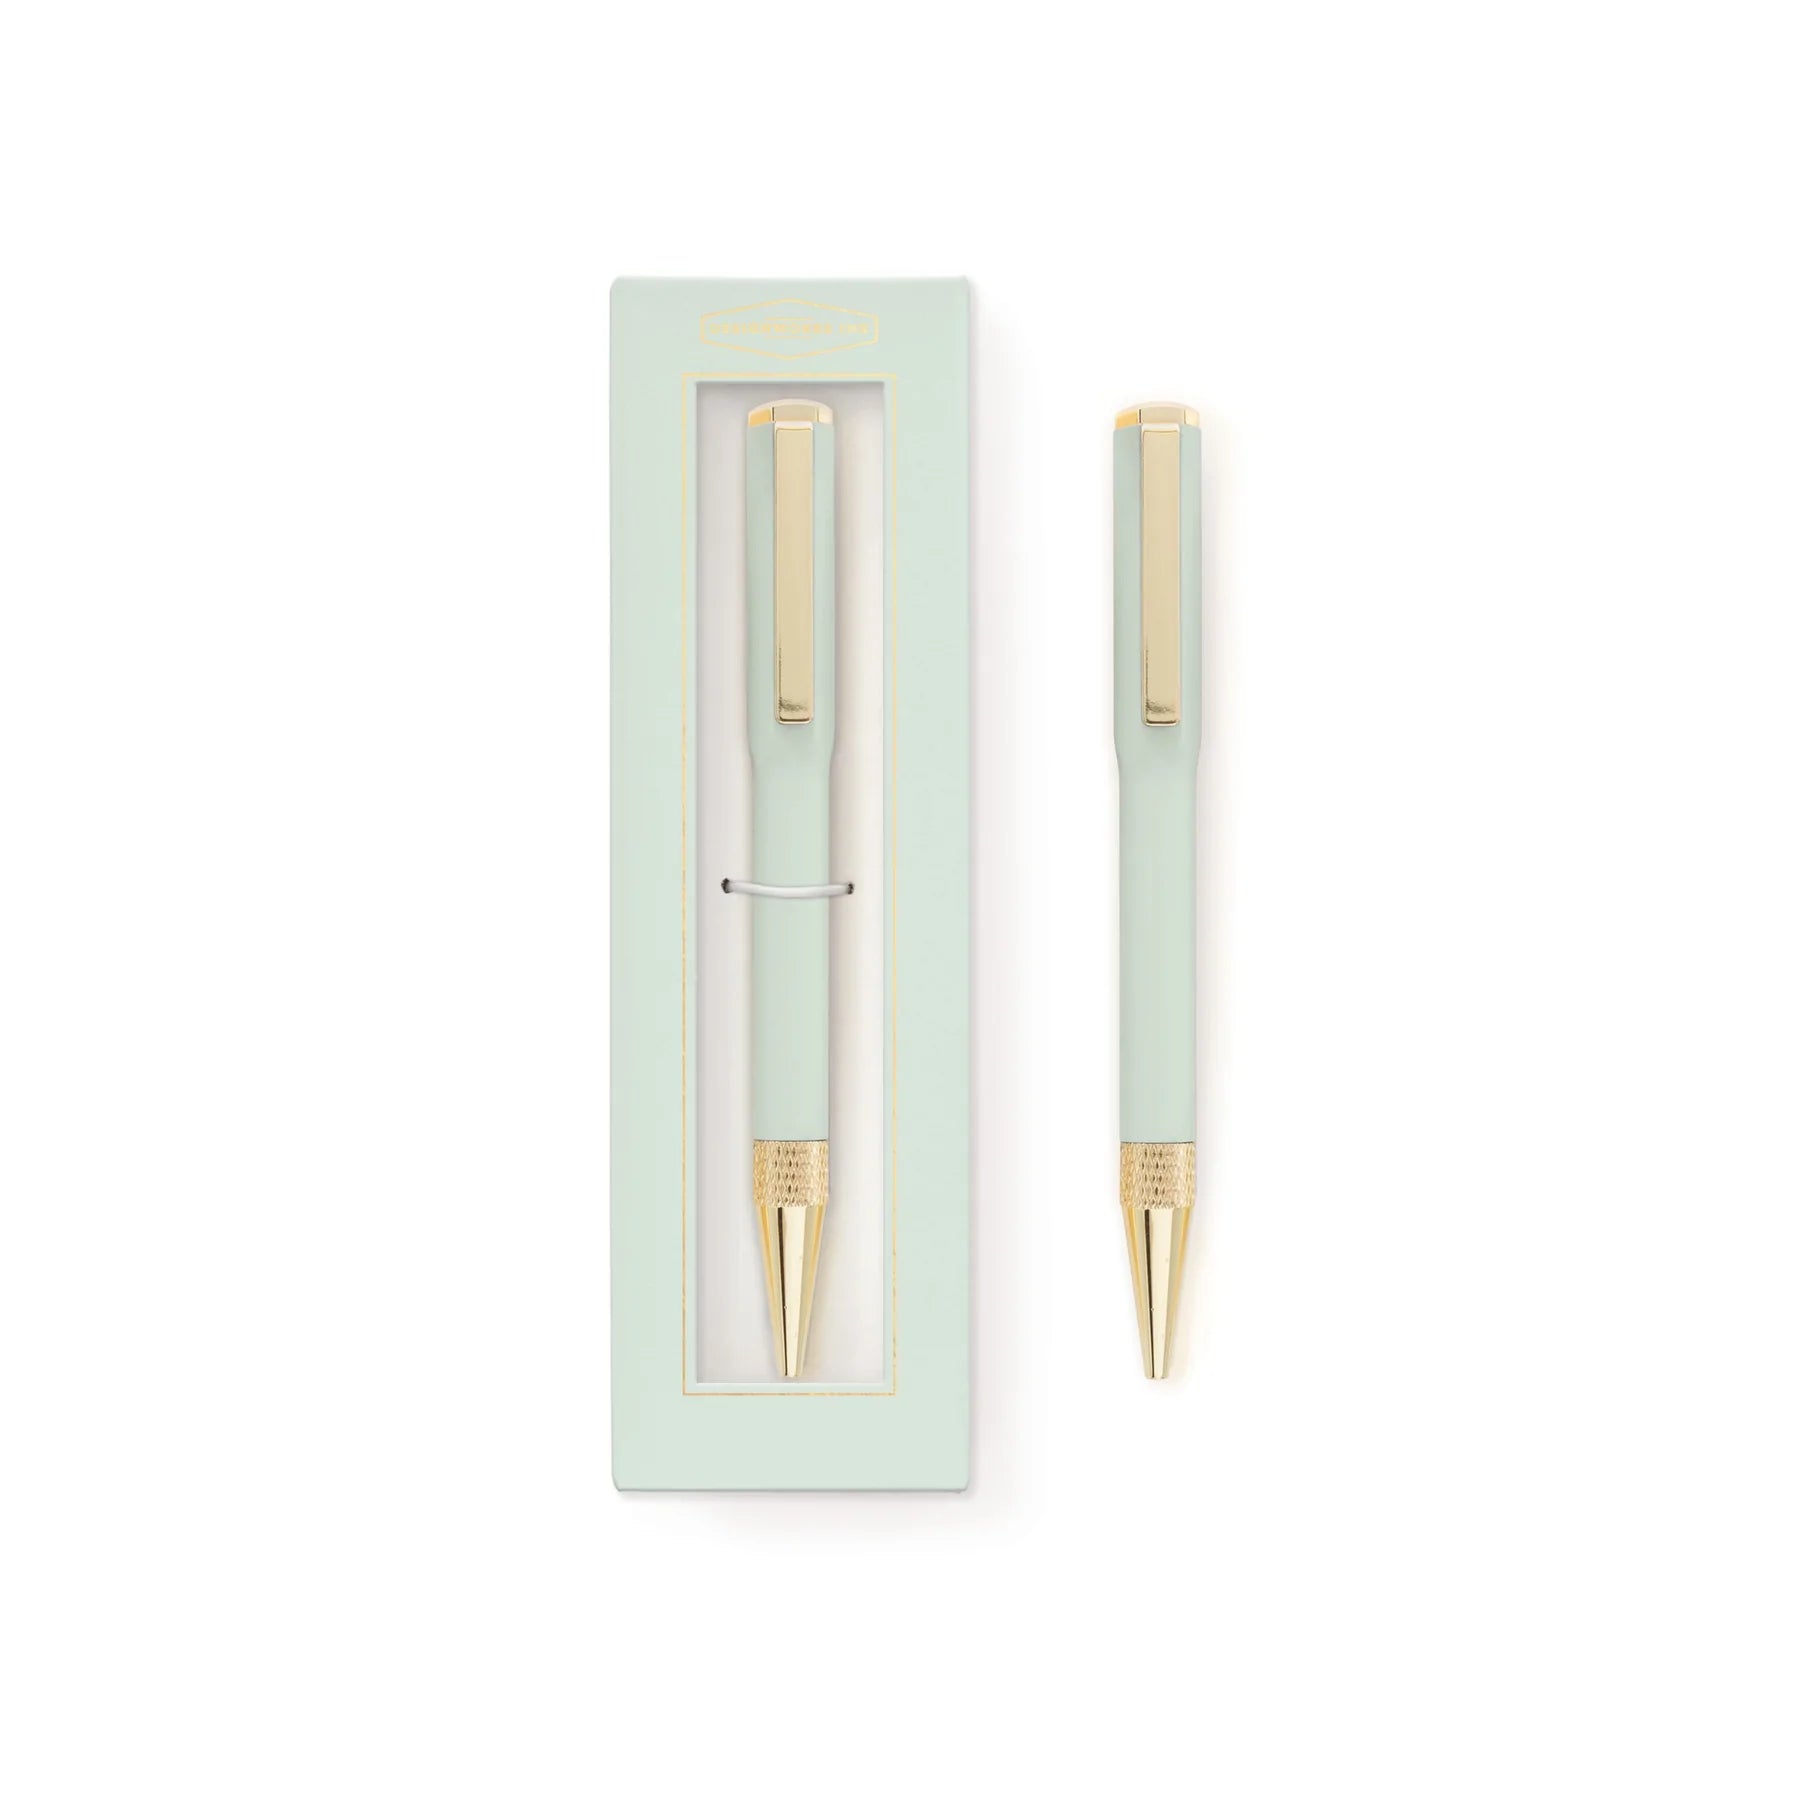 Mint block colour boxed pen from the Pencil Me In stationery shop.